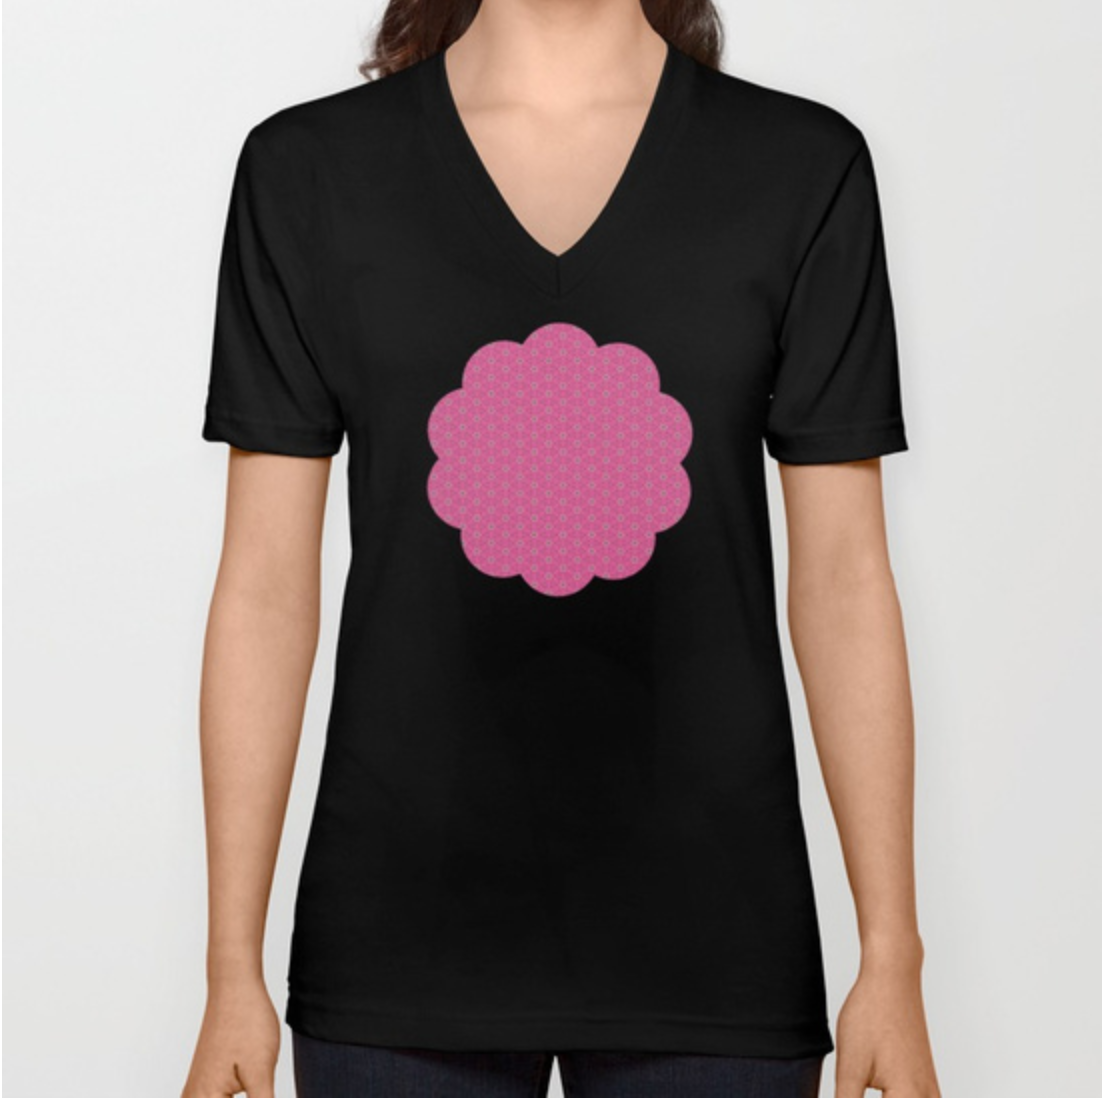 T-shirt femme by Rosa Lee Design on Society 6